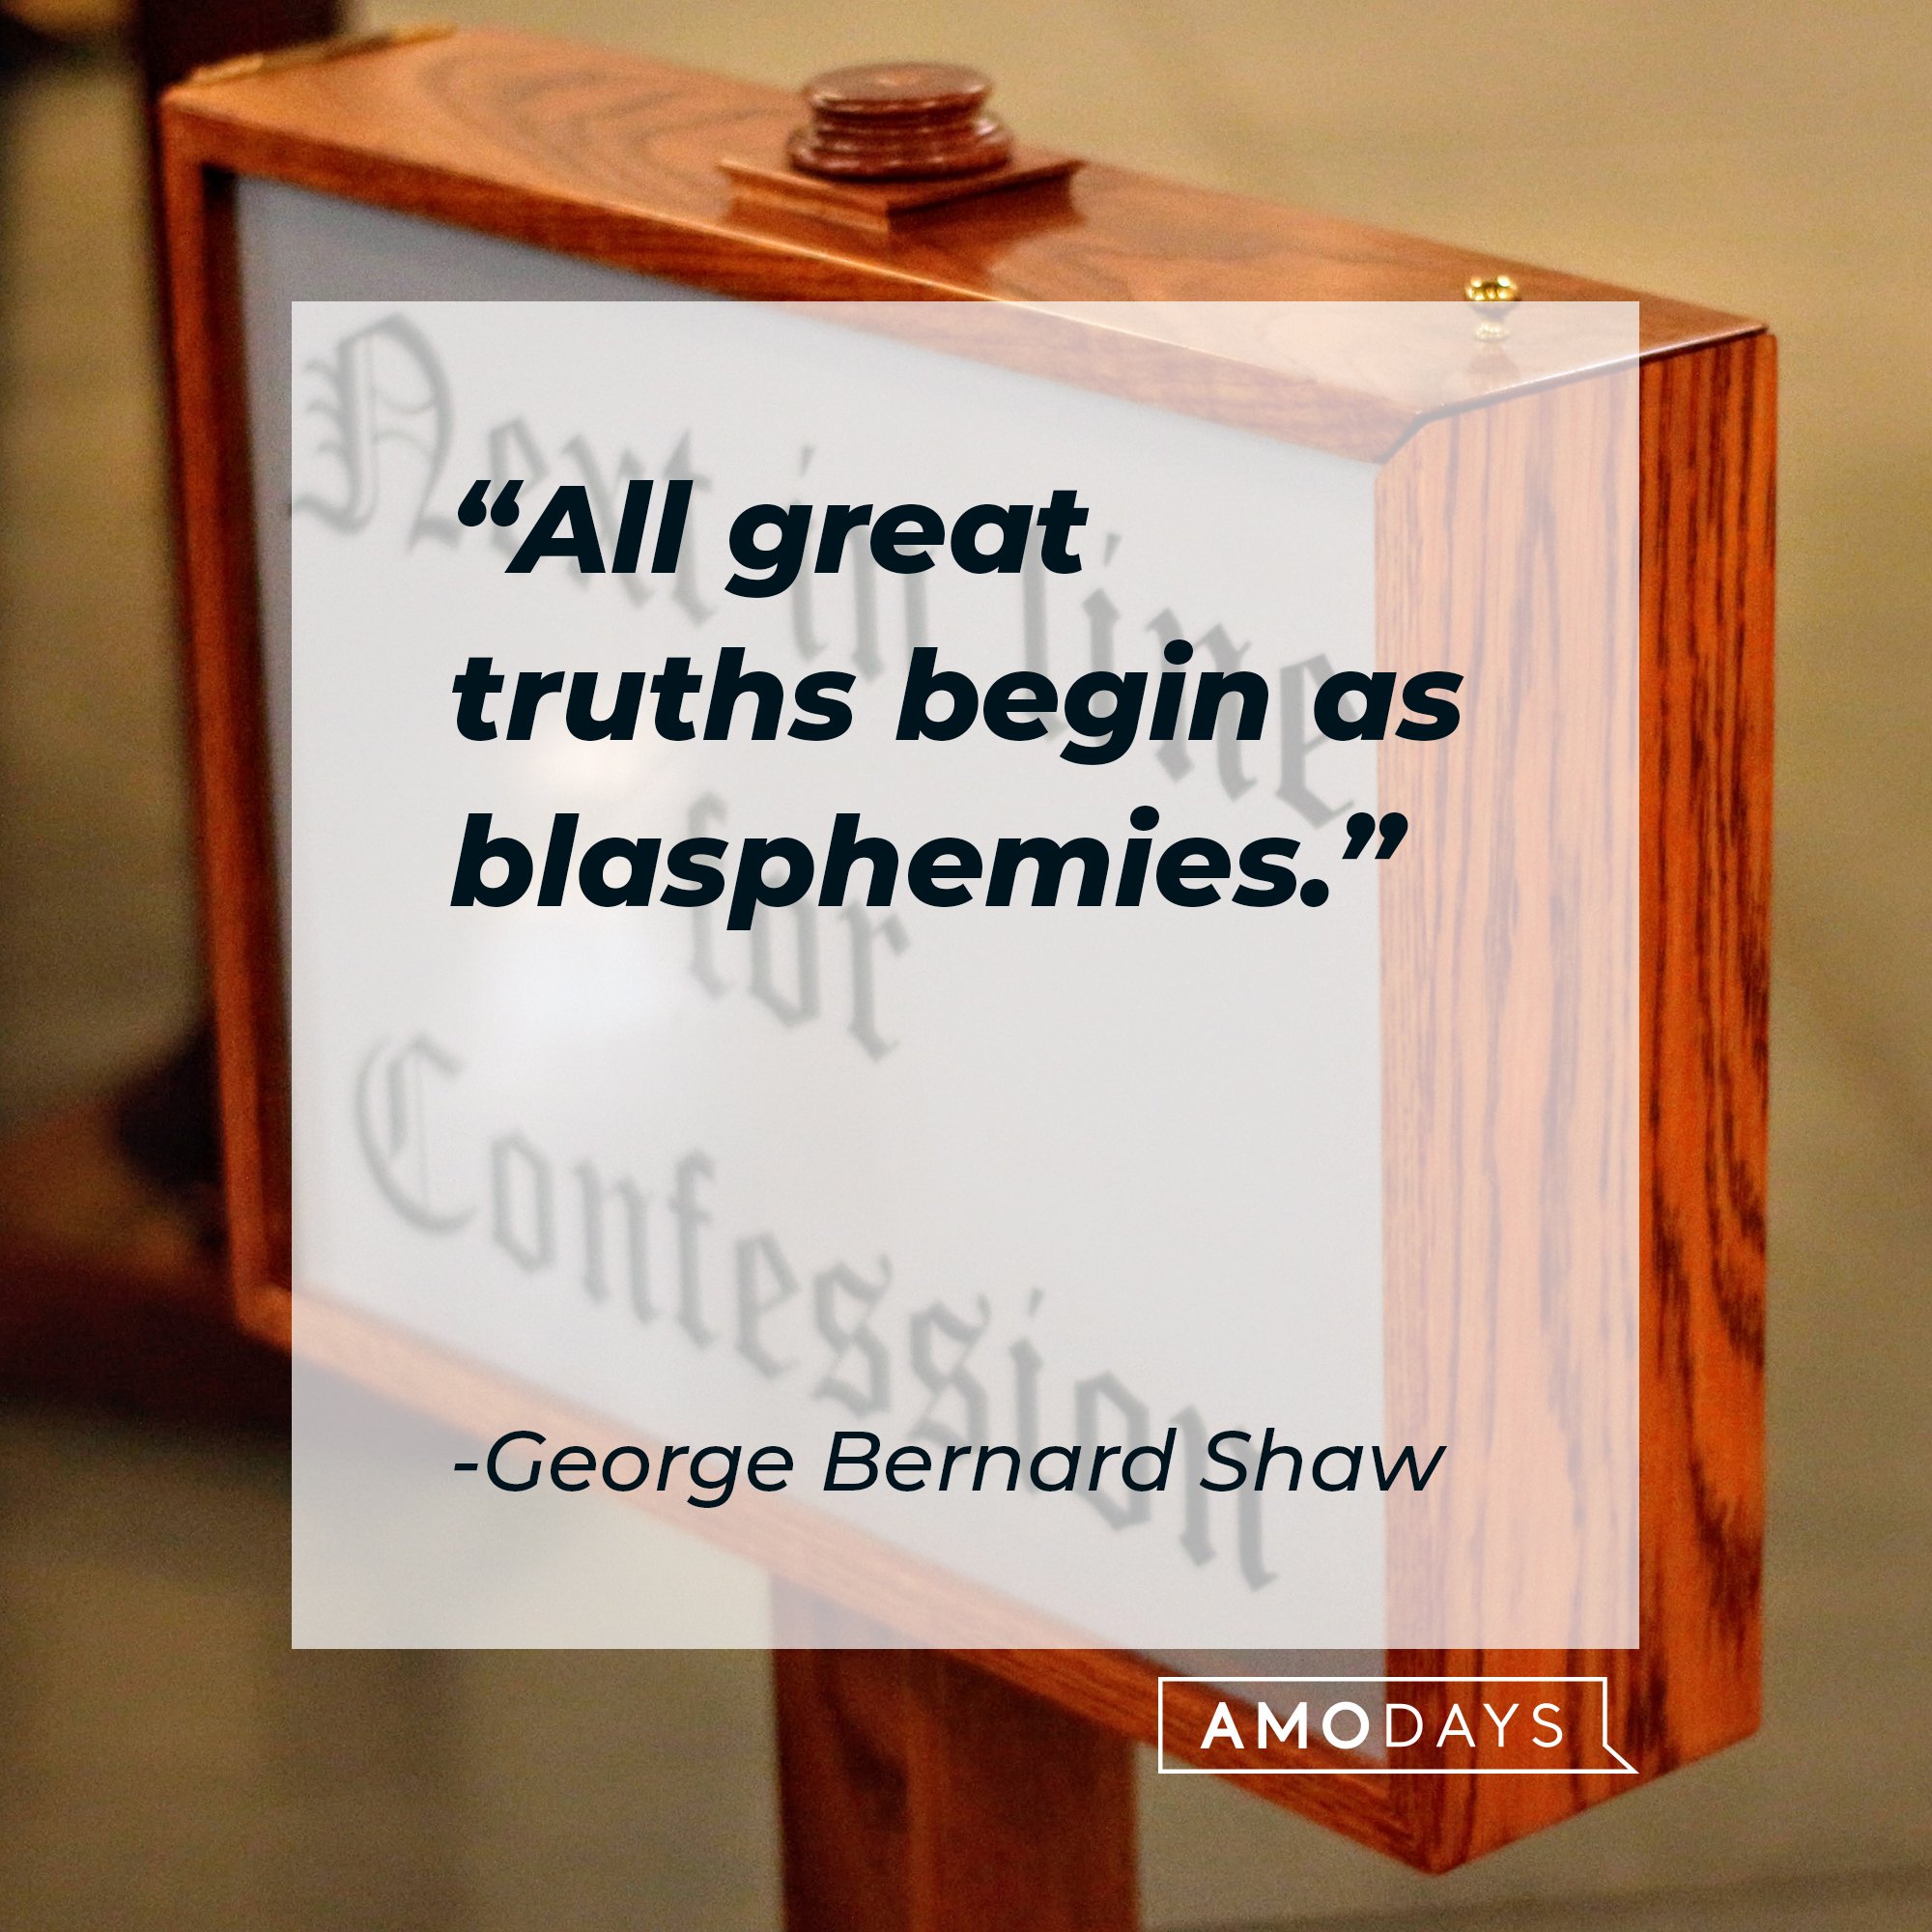 George Bernard Shaw’s quote: "All great truths begin as blasphemies." | Image: AmoDays